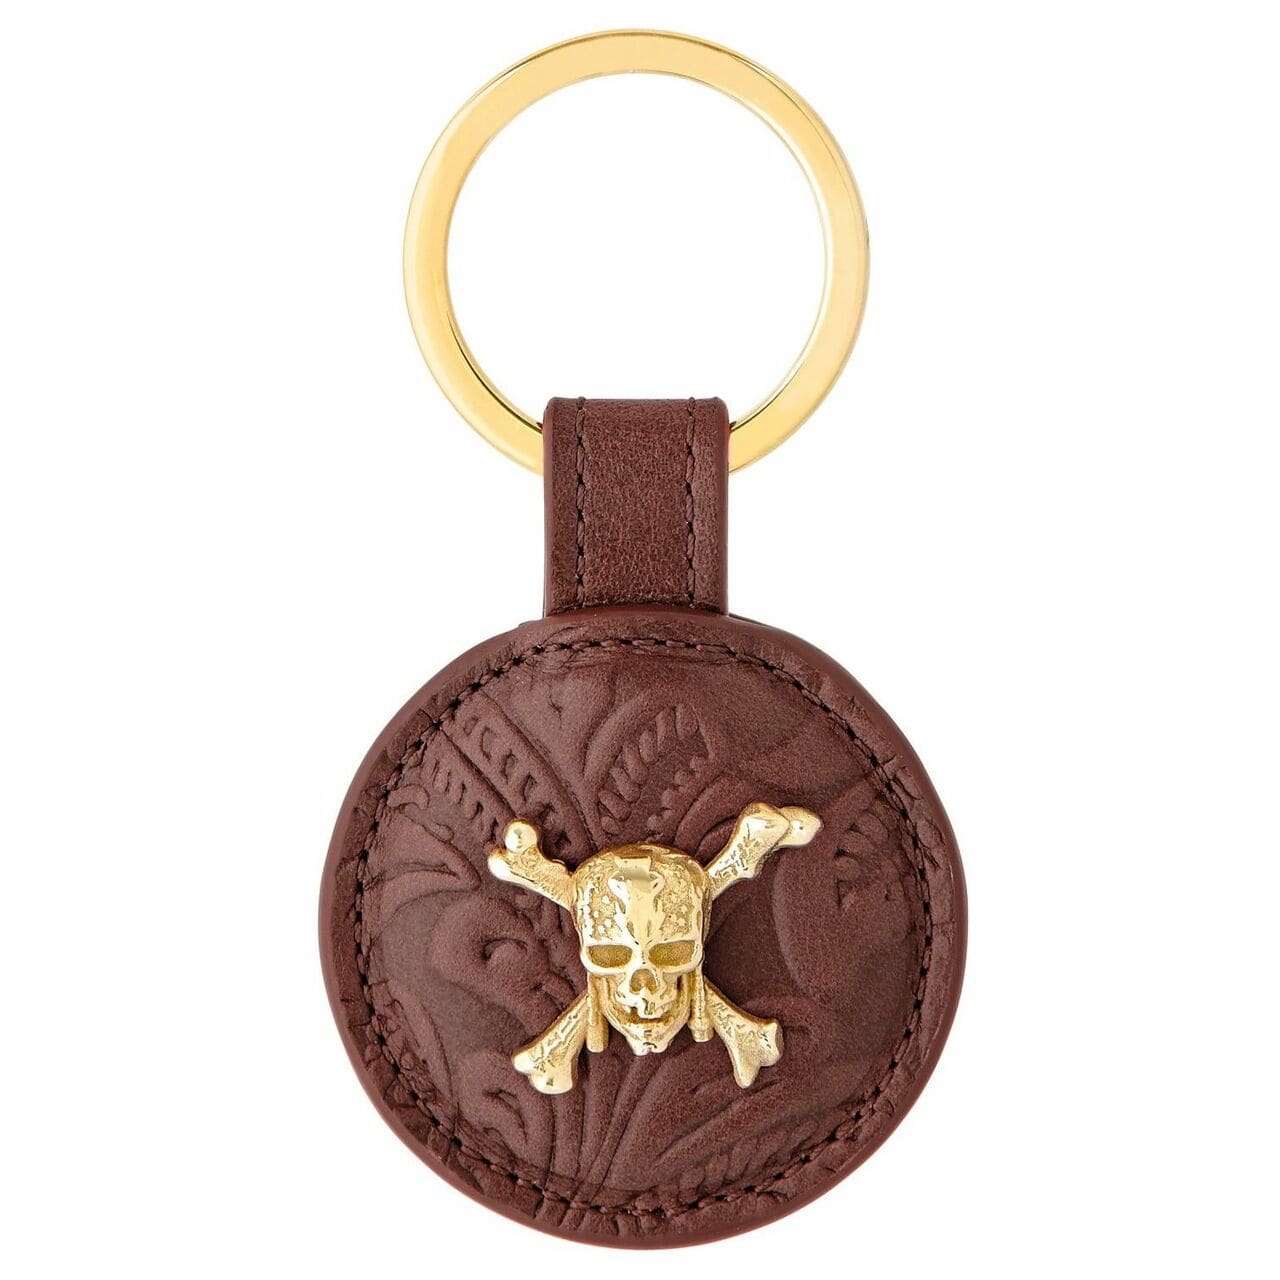 S.T. Dupont Pirates of the Caribbean Embossed Brown Cowhide Leather Key Ring 003101PC 3597390234629